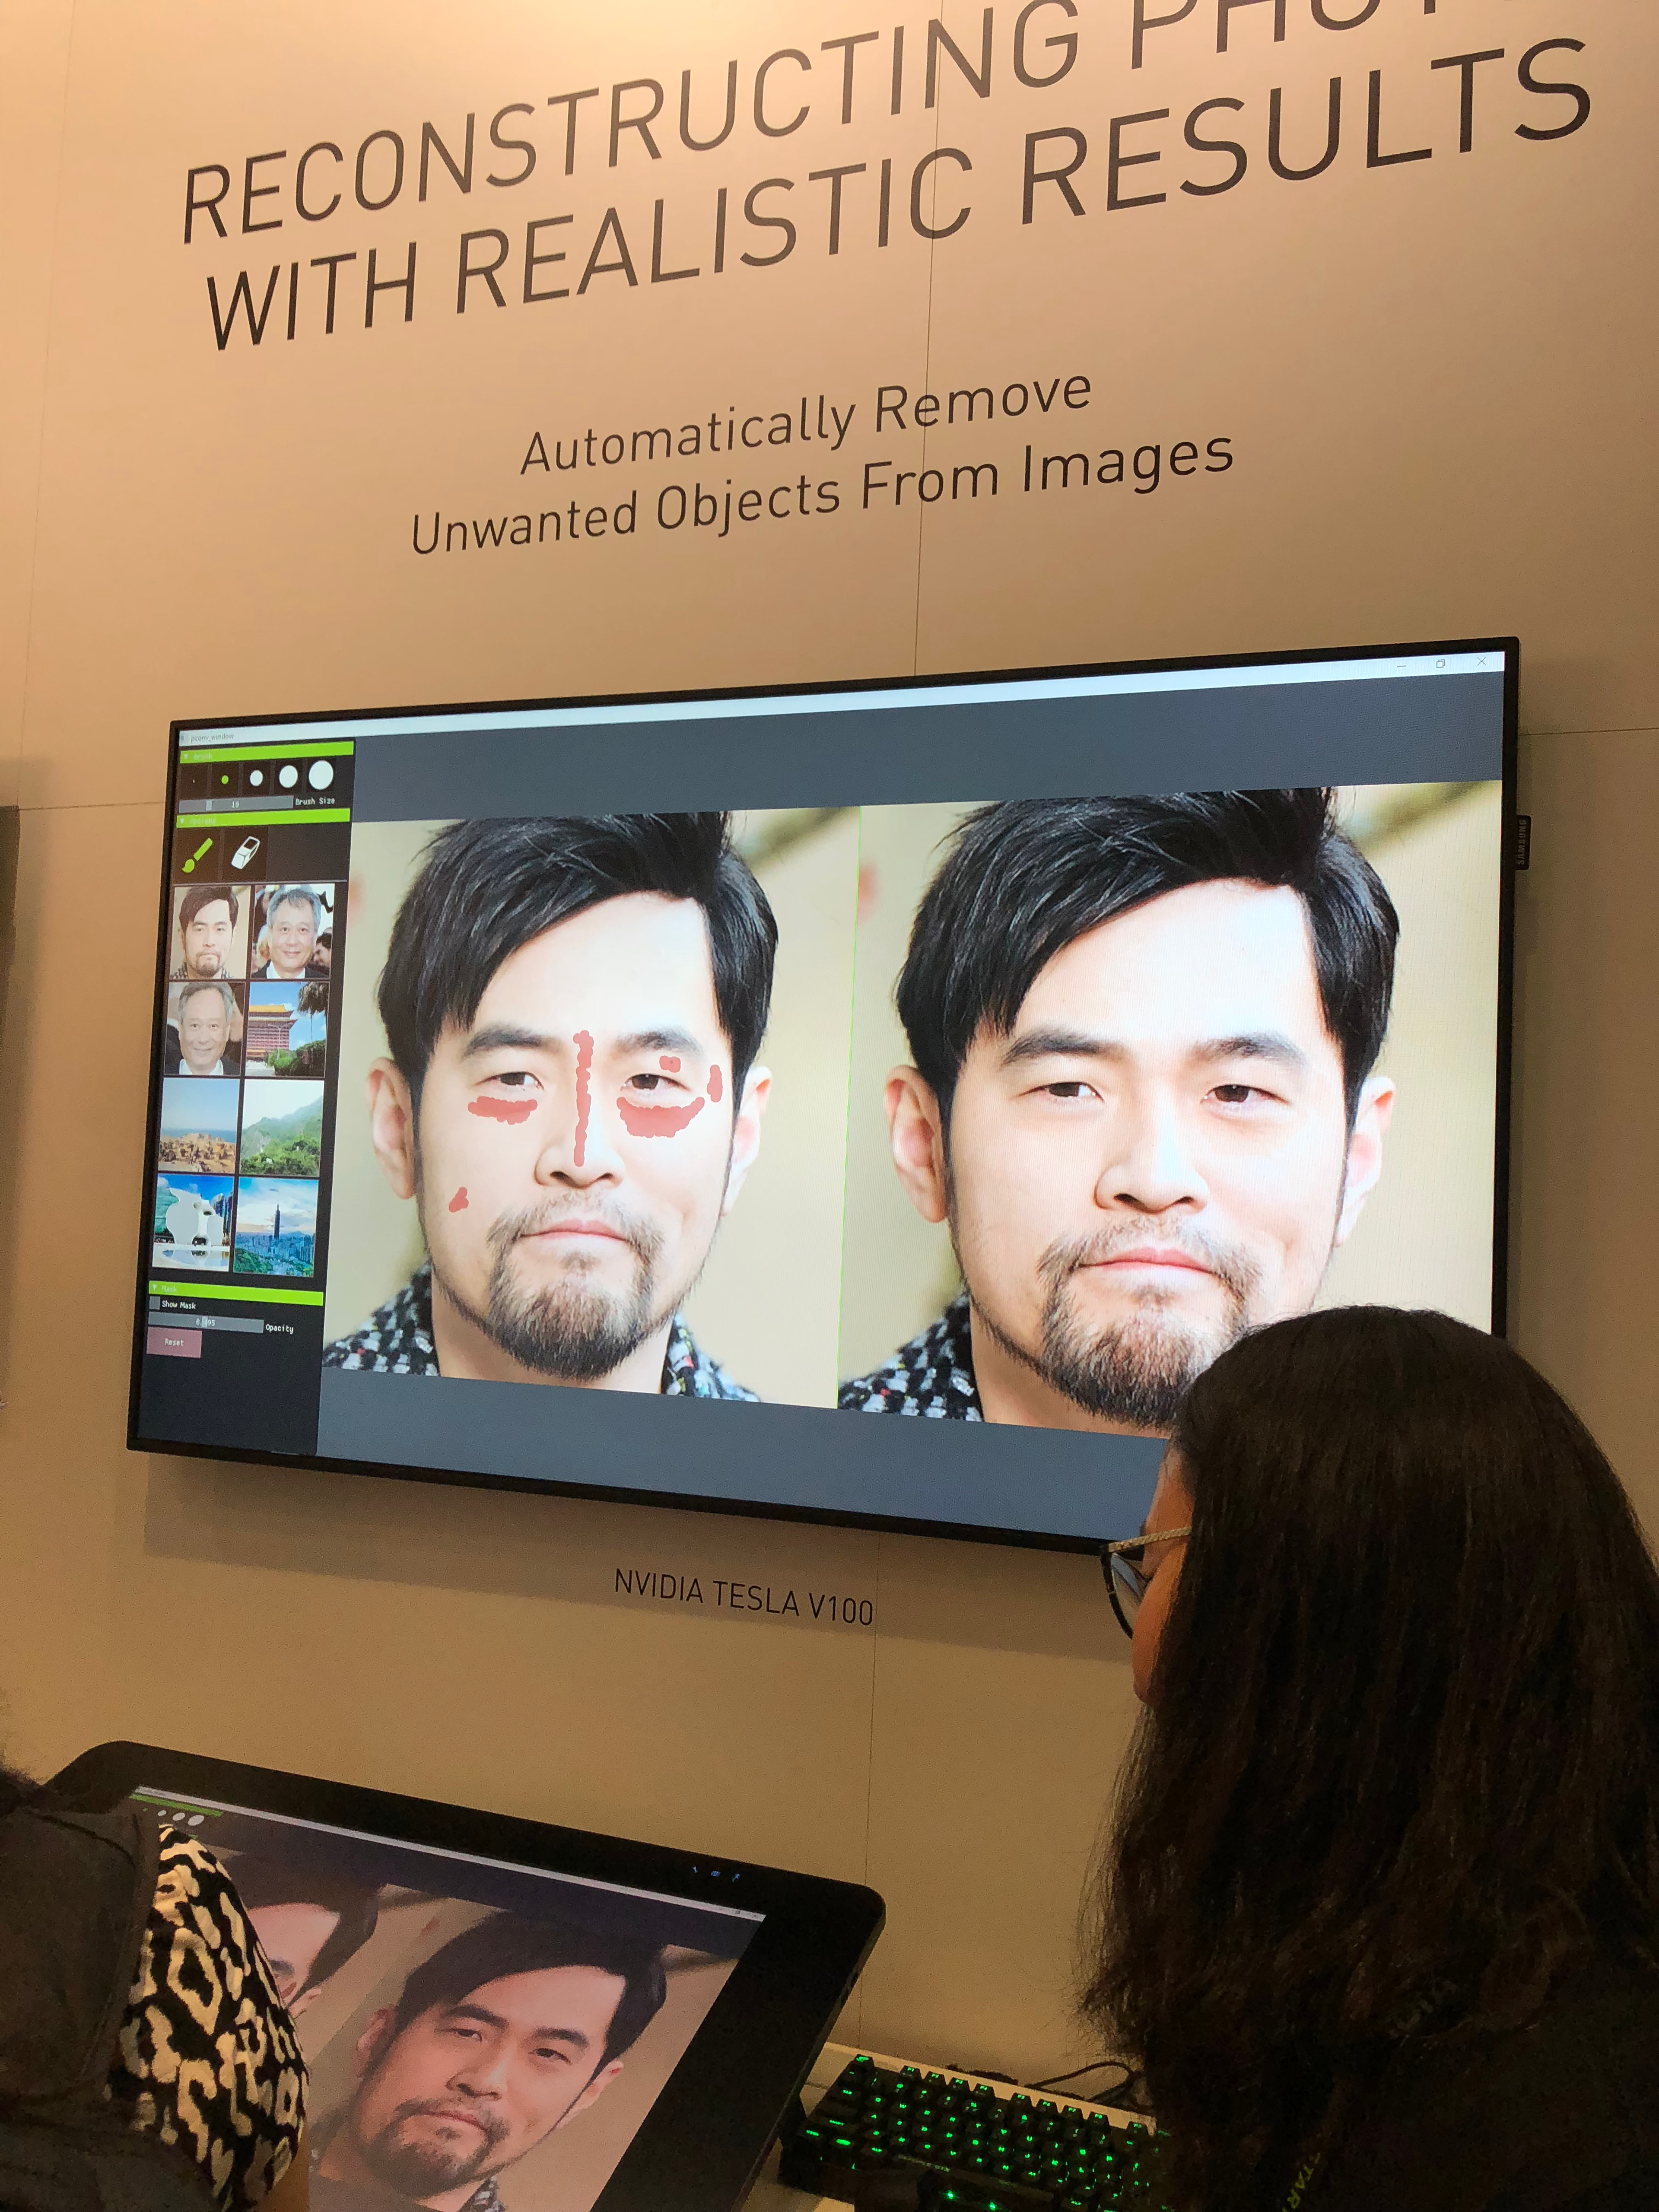 An image of Nvidia's live image editing technology at their booth